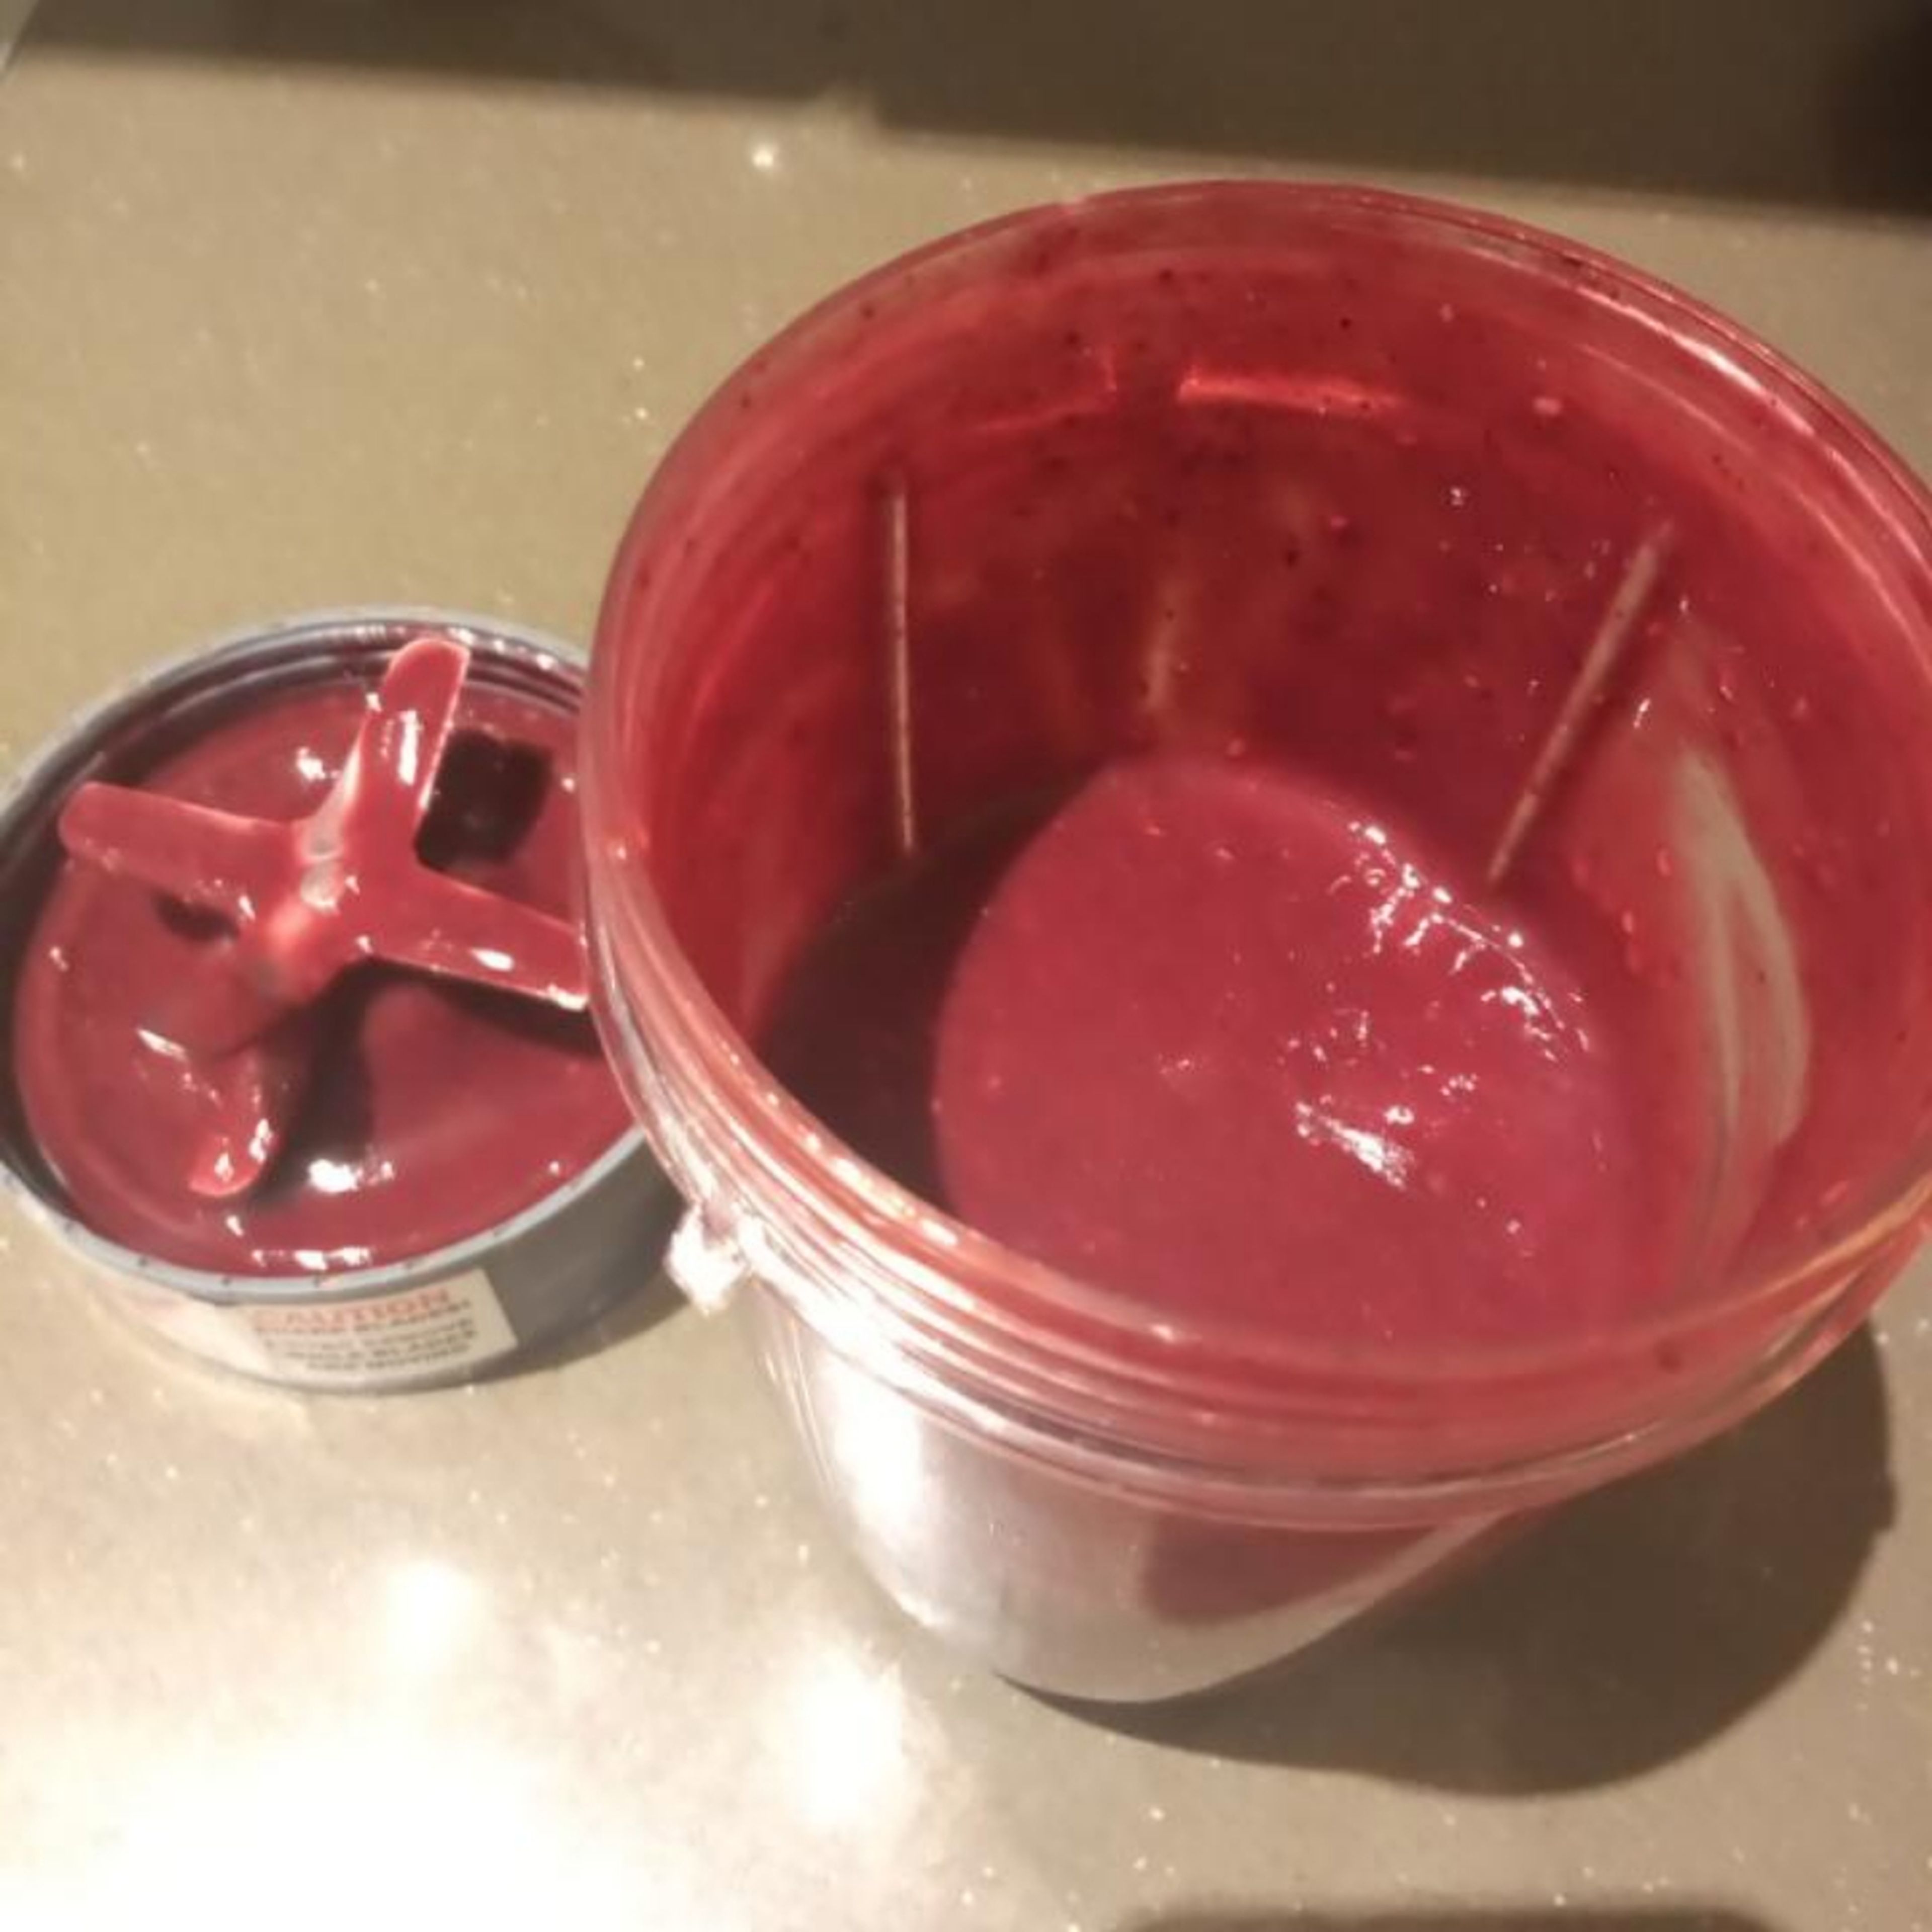 Once berry compote has cooled, using a blender or food processer, ensure the compote is a smooth consistency - that of a puree. Put through a mesh strainer in order to remove seeds (optional) and set aside in a jug.